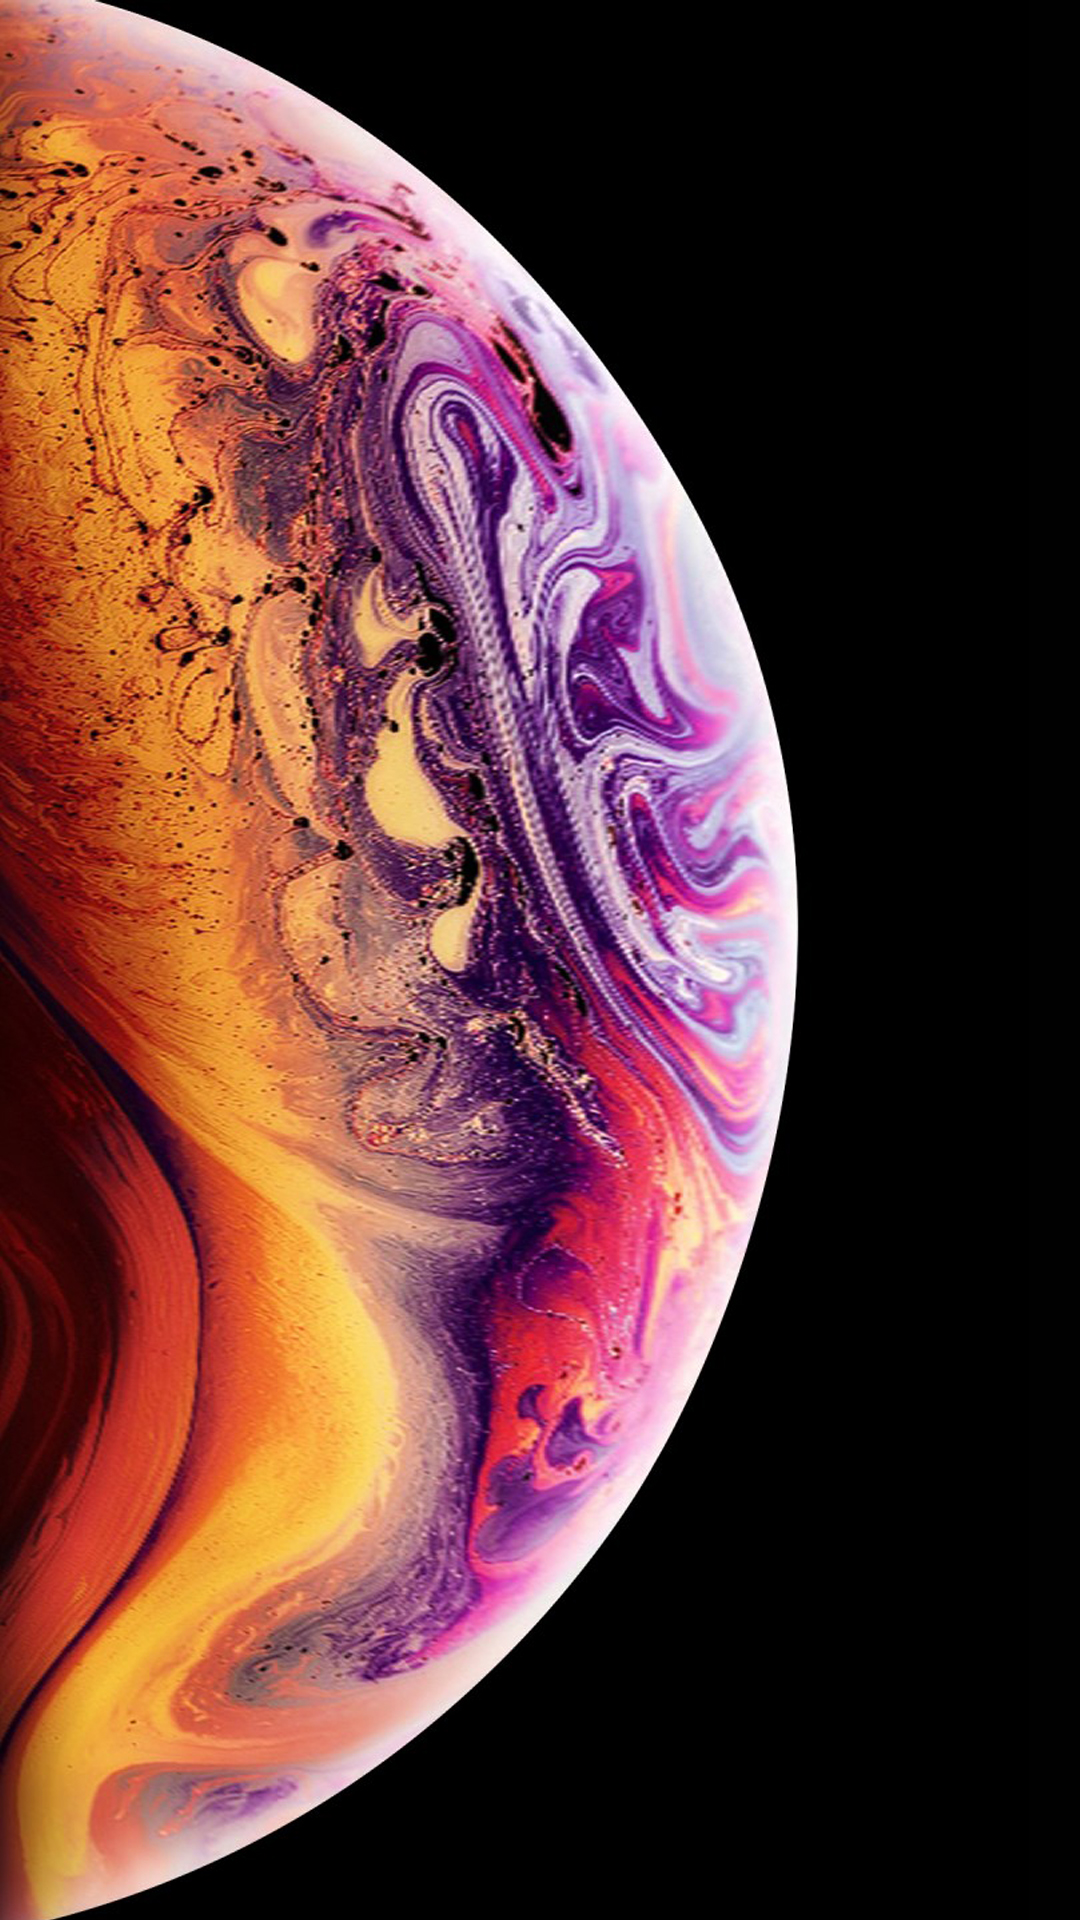 IPhone Xs Background - Download Mobile